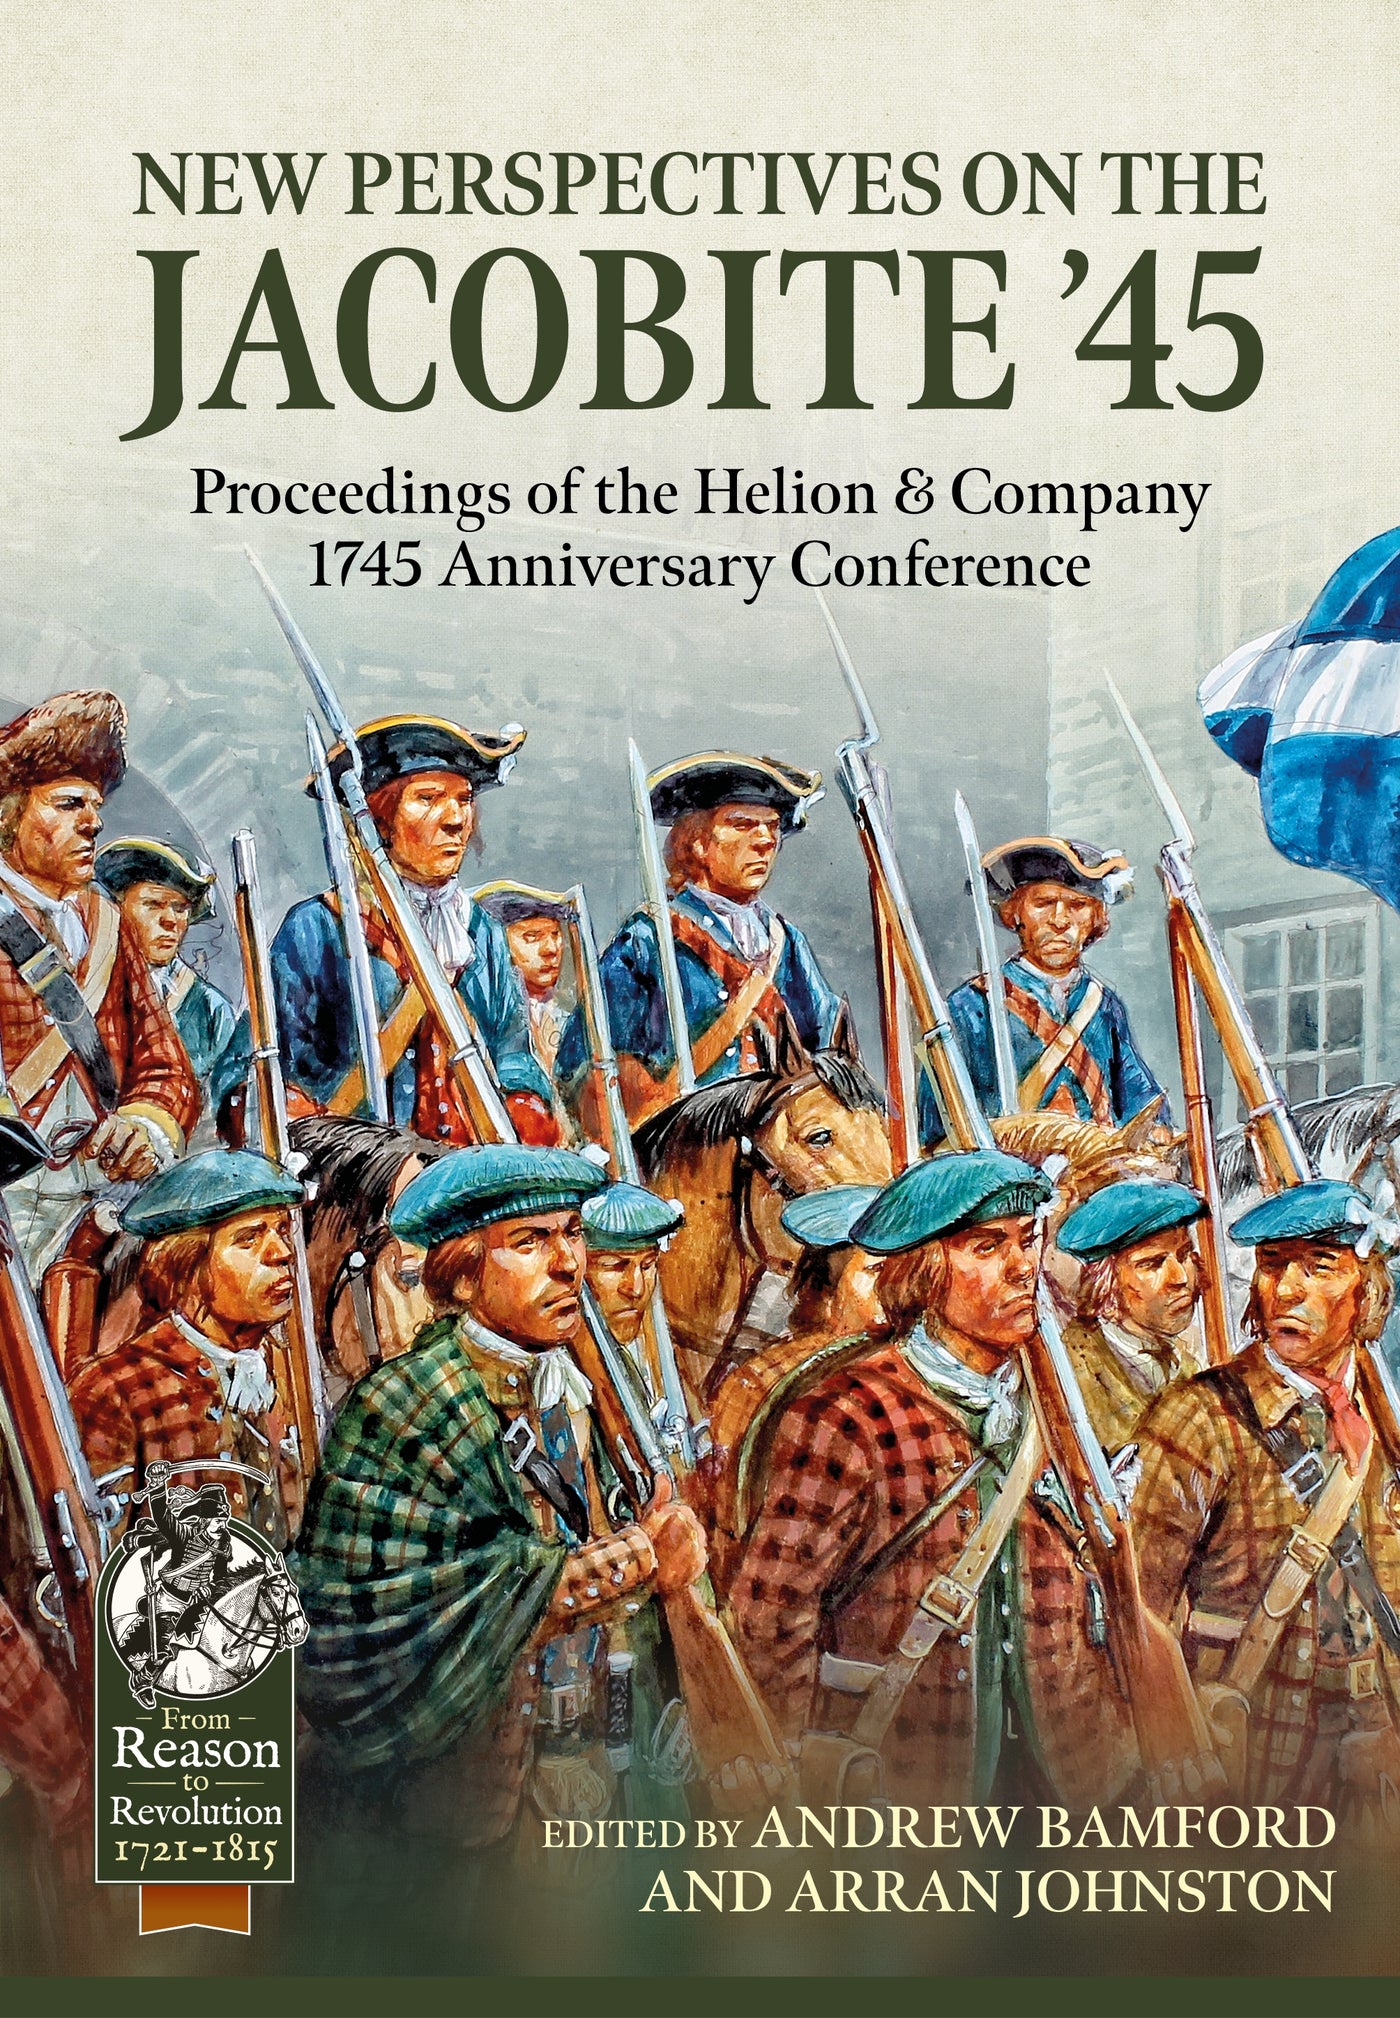 New Perspectives on the Jacobite ’45